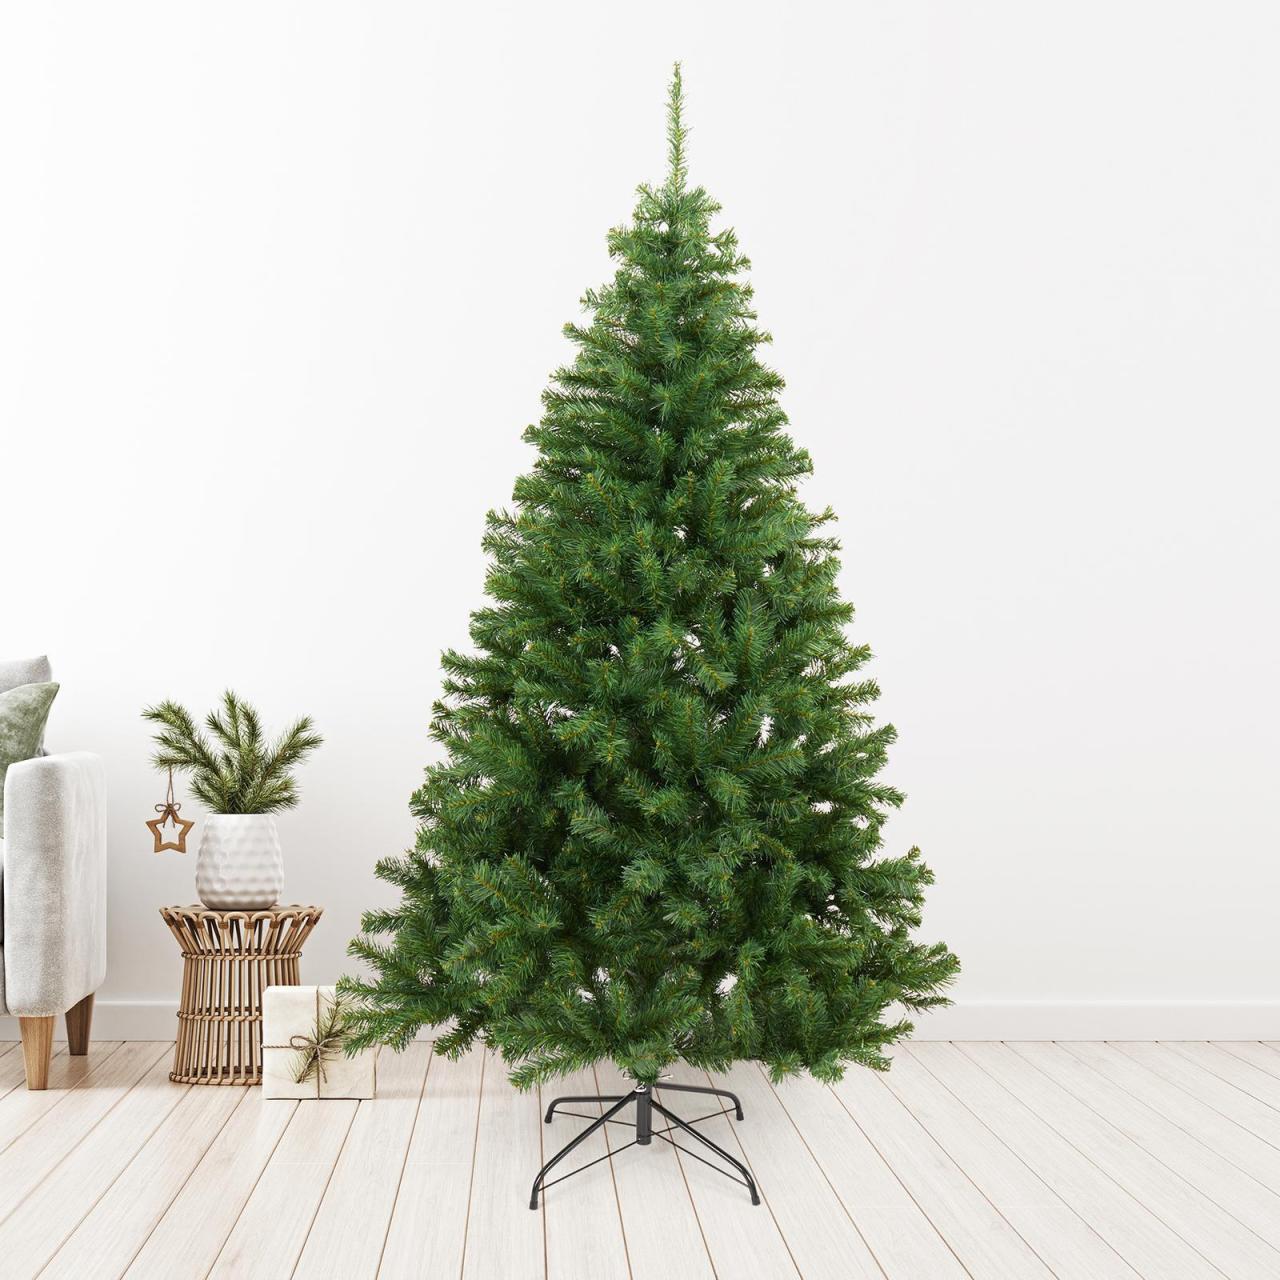 Hanging Plants Indoor | Bunnings Christmas Trees in Pots: A Guide to Selecting, Caring, and Storing Your Festive Foliage